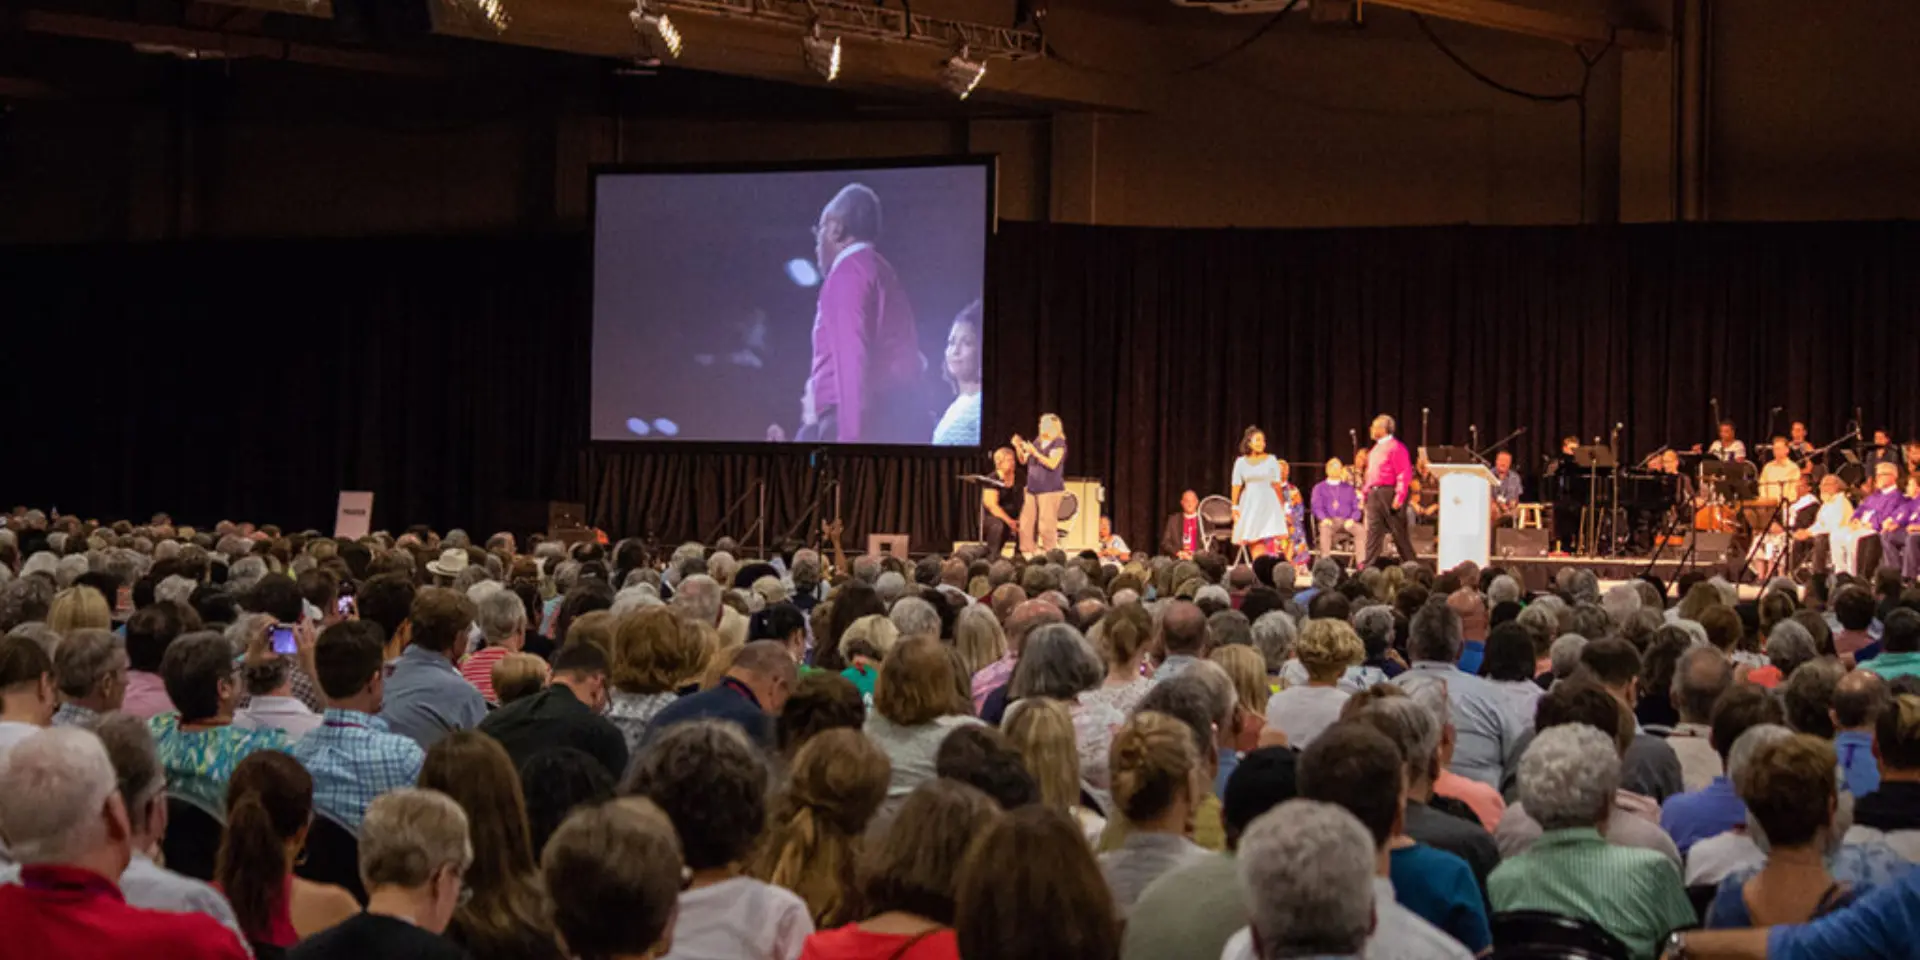 The Episcopal General Convention